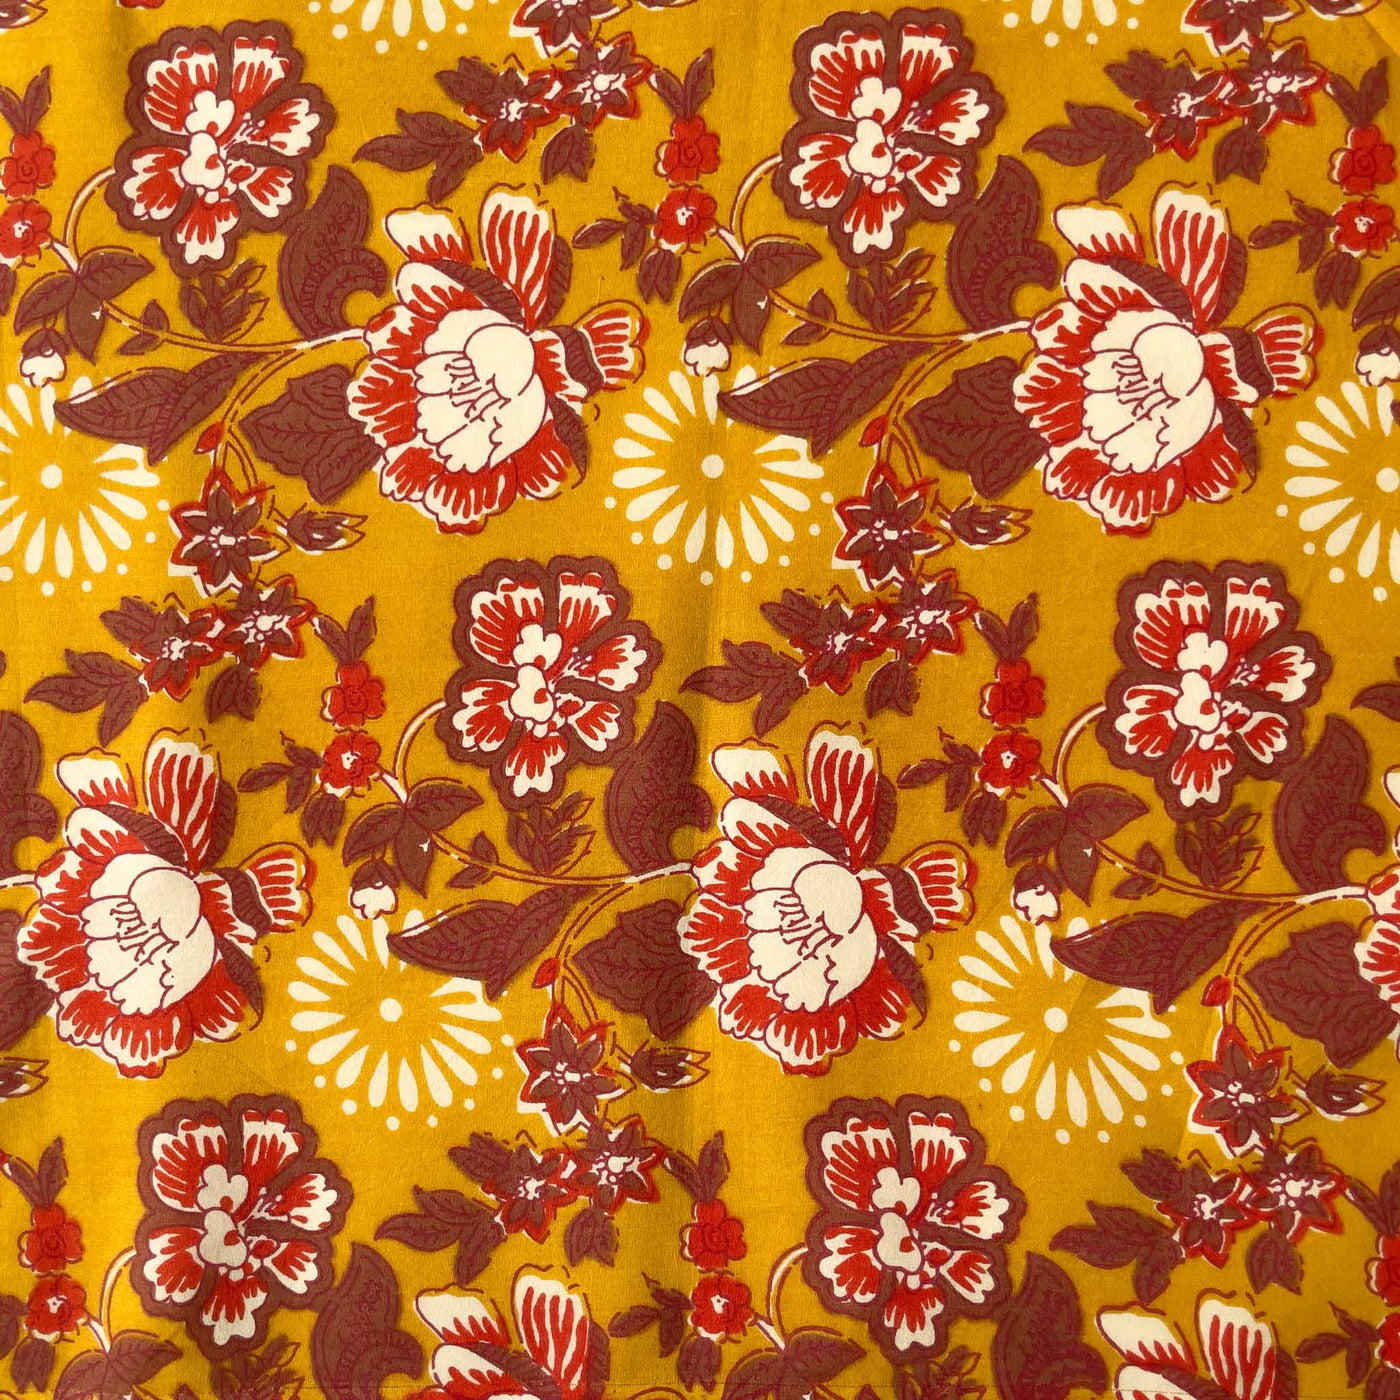 Fabric Pandit Fabric Mustard Yellow & Brown Abstract Floral Screen Printed Pure Cotton Fabric (Width 43 inches)